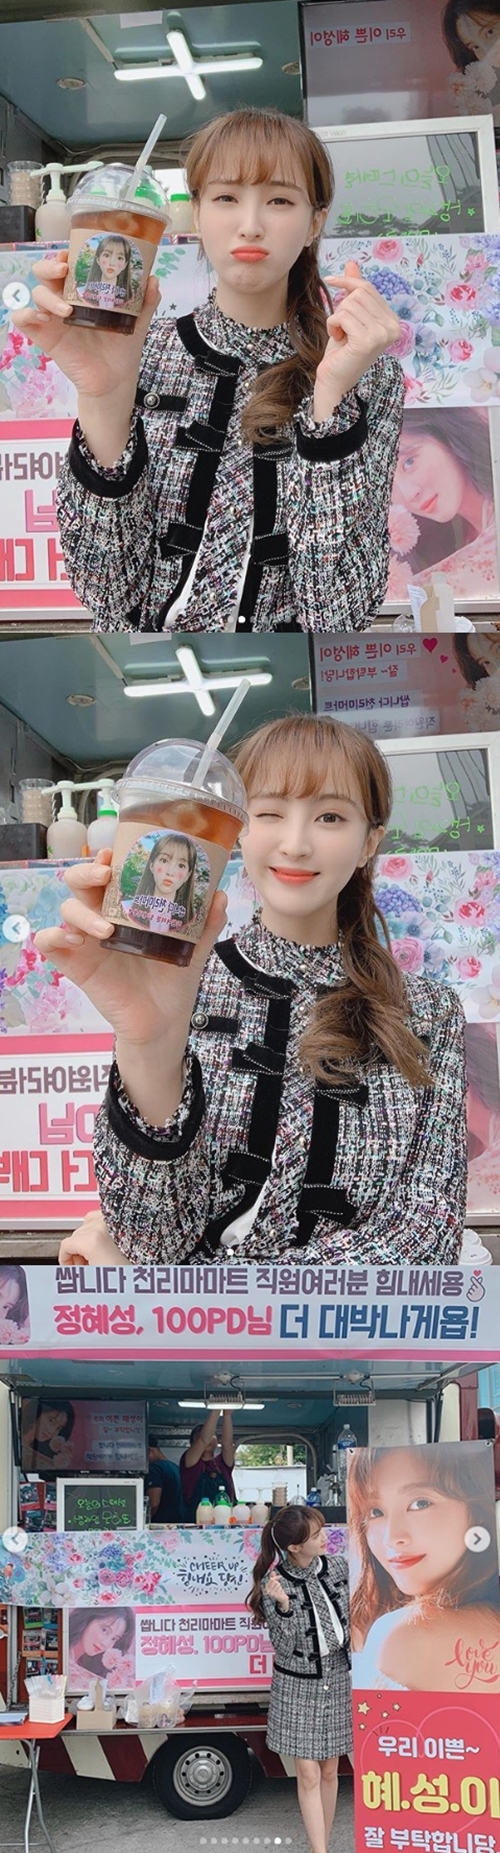 <p>Actor Jung Hye-sung this Jo Bo-ah and of friendship was shown.</p><p>17, Jung Hye-sung to his Instagram account several photos with the article was.</p><p>In the photo Jung Hye-sung, now coffee in hand and take a selfie and look.</p><p>In the post Jung Hye-sung“, but as the difficulty of the continuous was I so surprise with the power that all too pretty this have such a friend yet the world is a living one. . Called the new party feel give thanks for the season you have and love and said,”Jo Bo-ah In The thank you, said.</p><p>Also “I the season for that is this loved or wanted. I happily receive your love and the real power to send to the”he said.</p><p>Jung Hye-sung is currently in tvN ‘cheap cloth and Smart’appeared in China.</p>